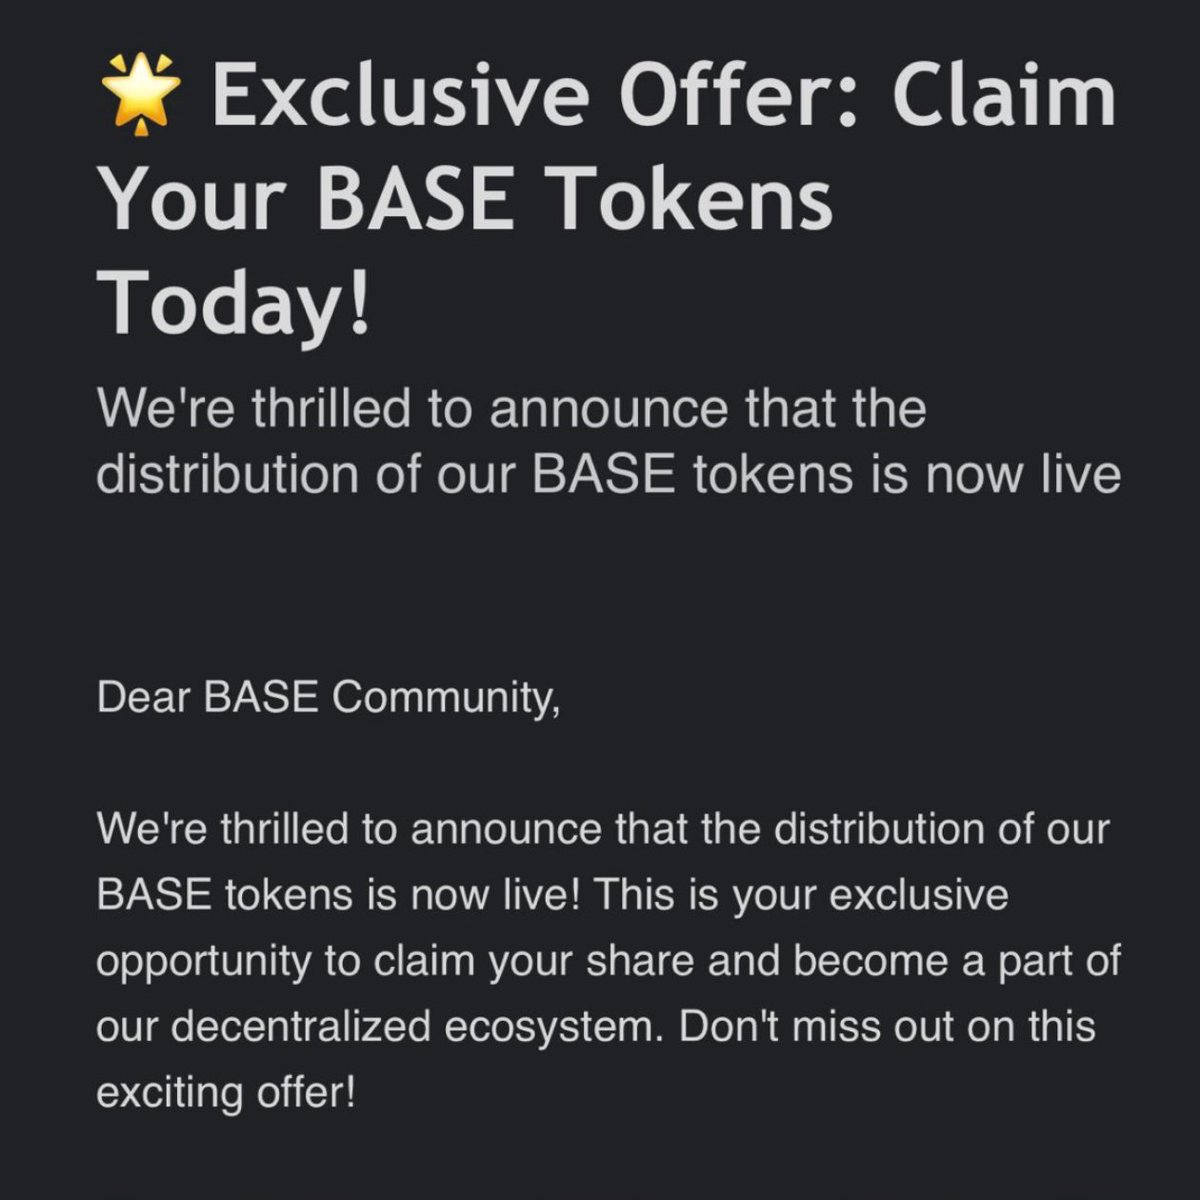 🚨 SCAM ALERT 🚨 Please do not interact with any email or posts offering a claim for BASE tokens! The gas token for @base is Ethereum and they have no plans to release a native token. Always verify offers and links with official sources before connecting your Web3 wallet.